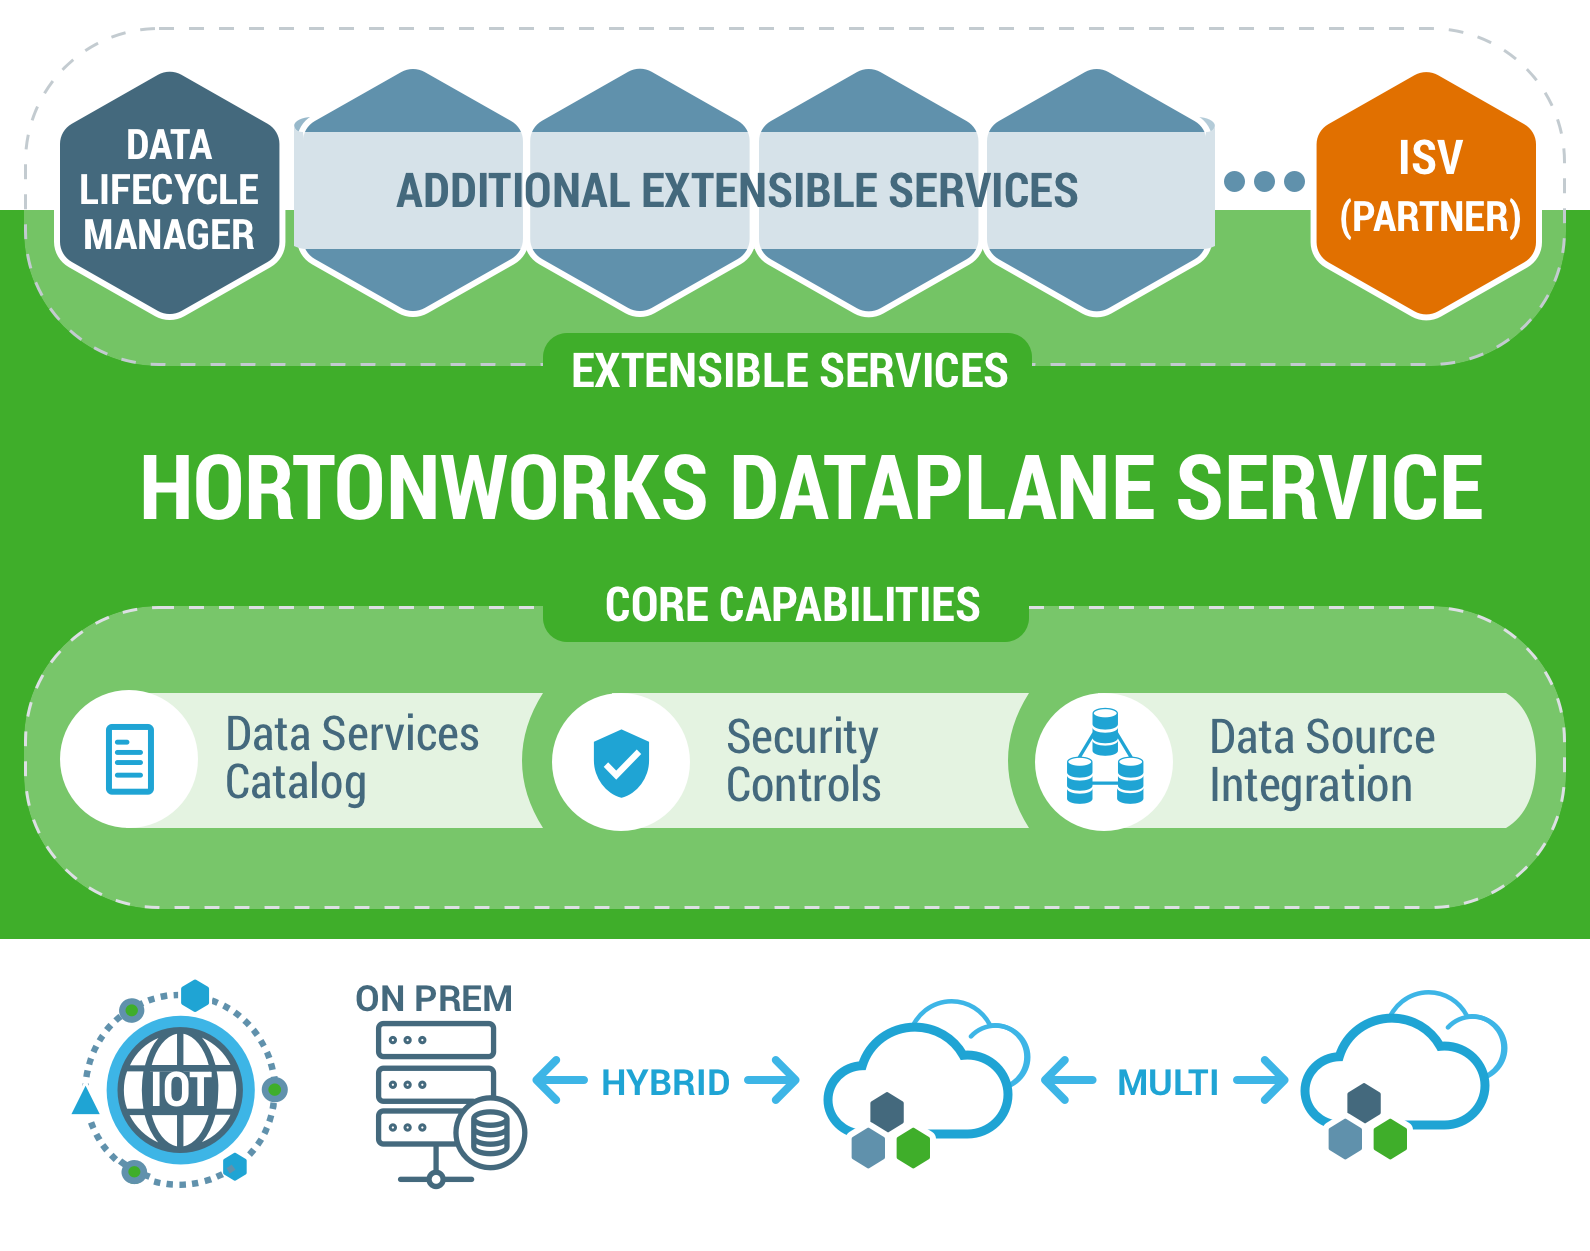 Hortonworks DataPlane Service promises to take the pain out of data governance